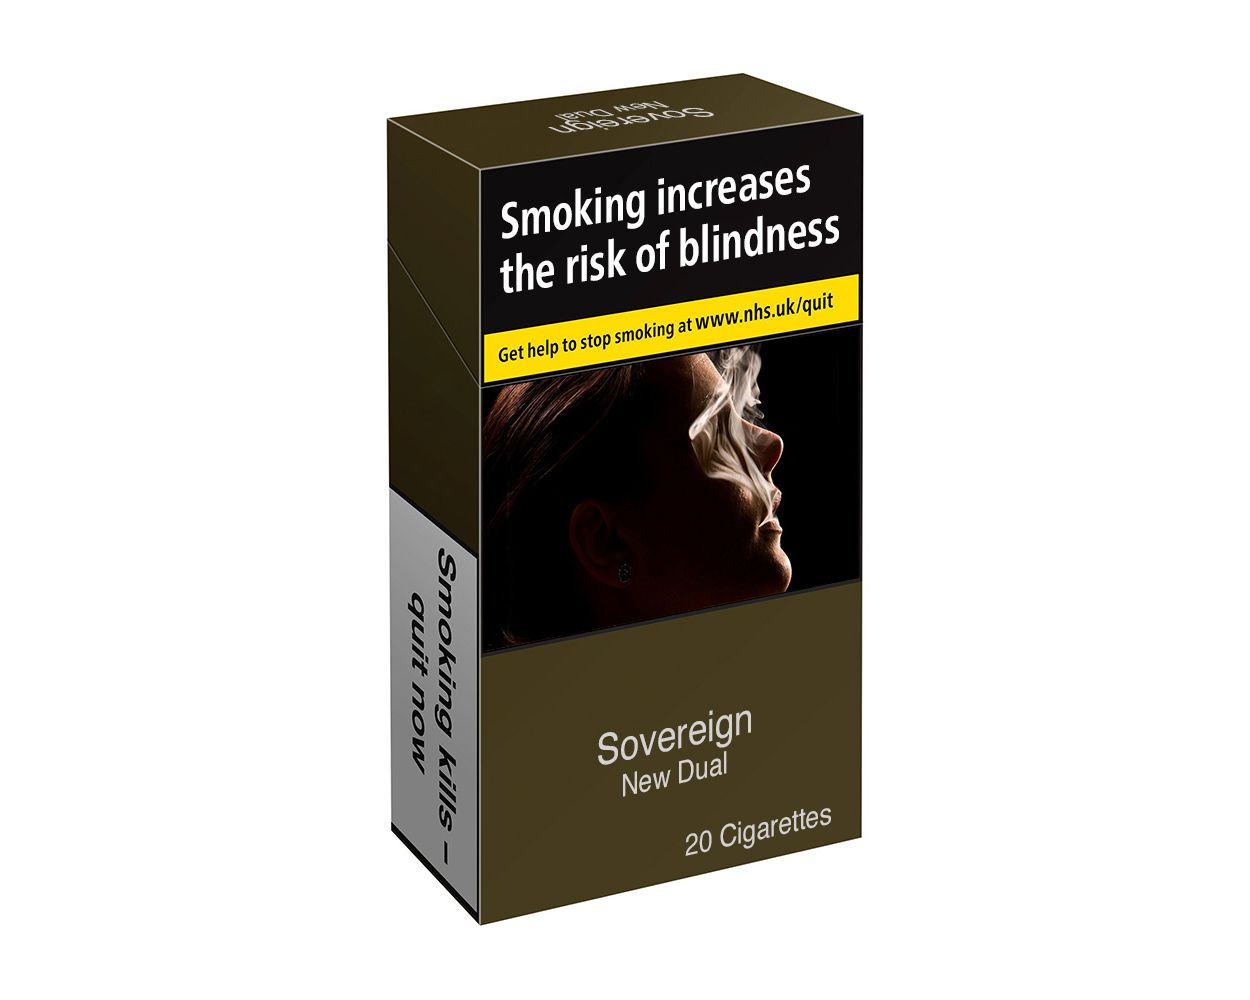 Sovereign New Dual King Size - 20 Cigarettes